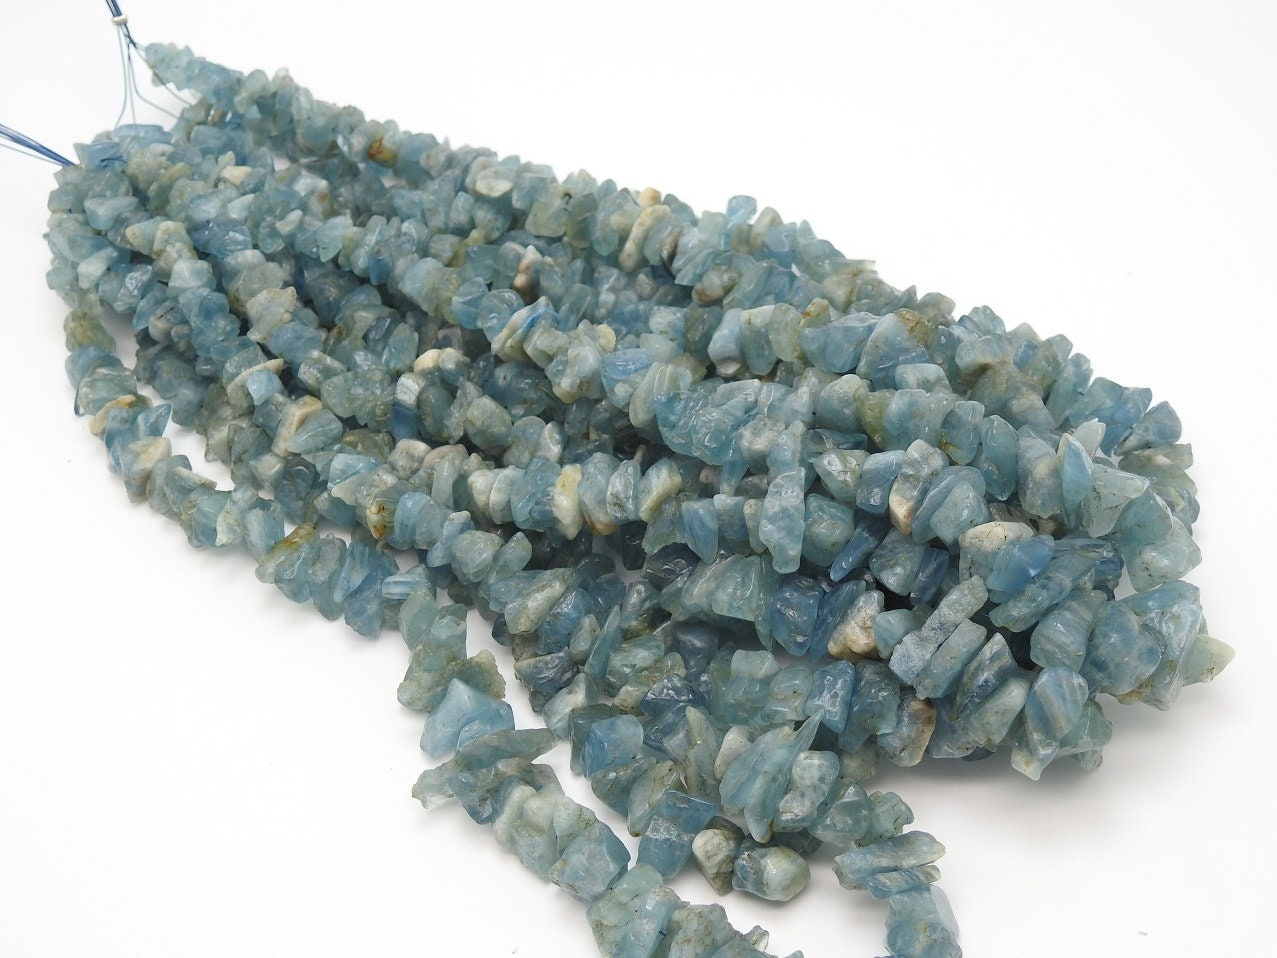 Aquamarine Polished Rough Bead,Uncut,Chip,Anklets,16Inch 18X12To8X5MM Approx,Wholesaler,Supplies,New Arrival,100%Natural PME-RB1 | Save 33% - Rajasthan Living 16